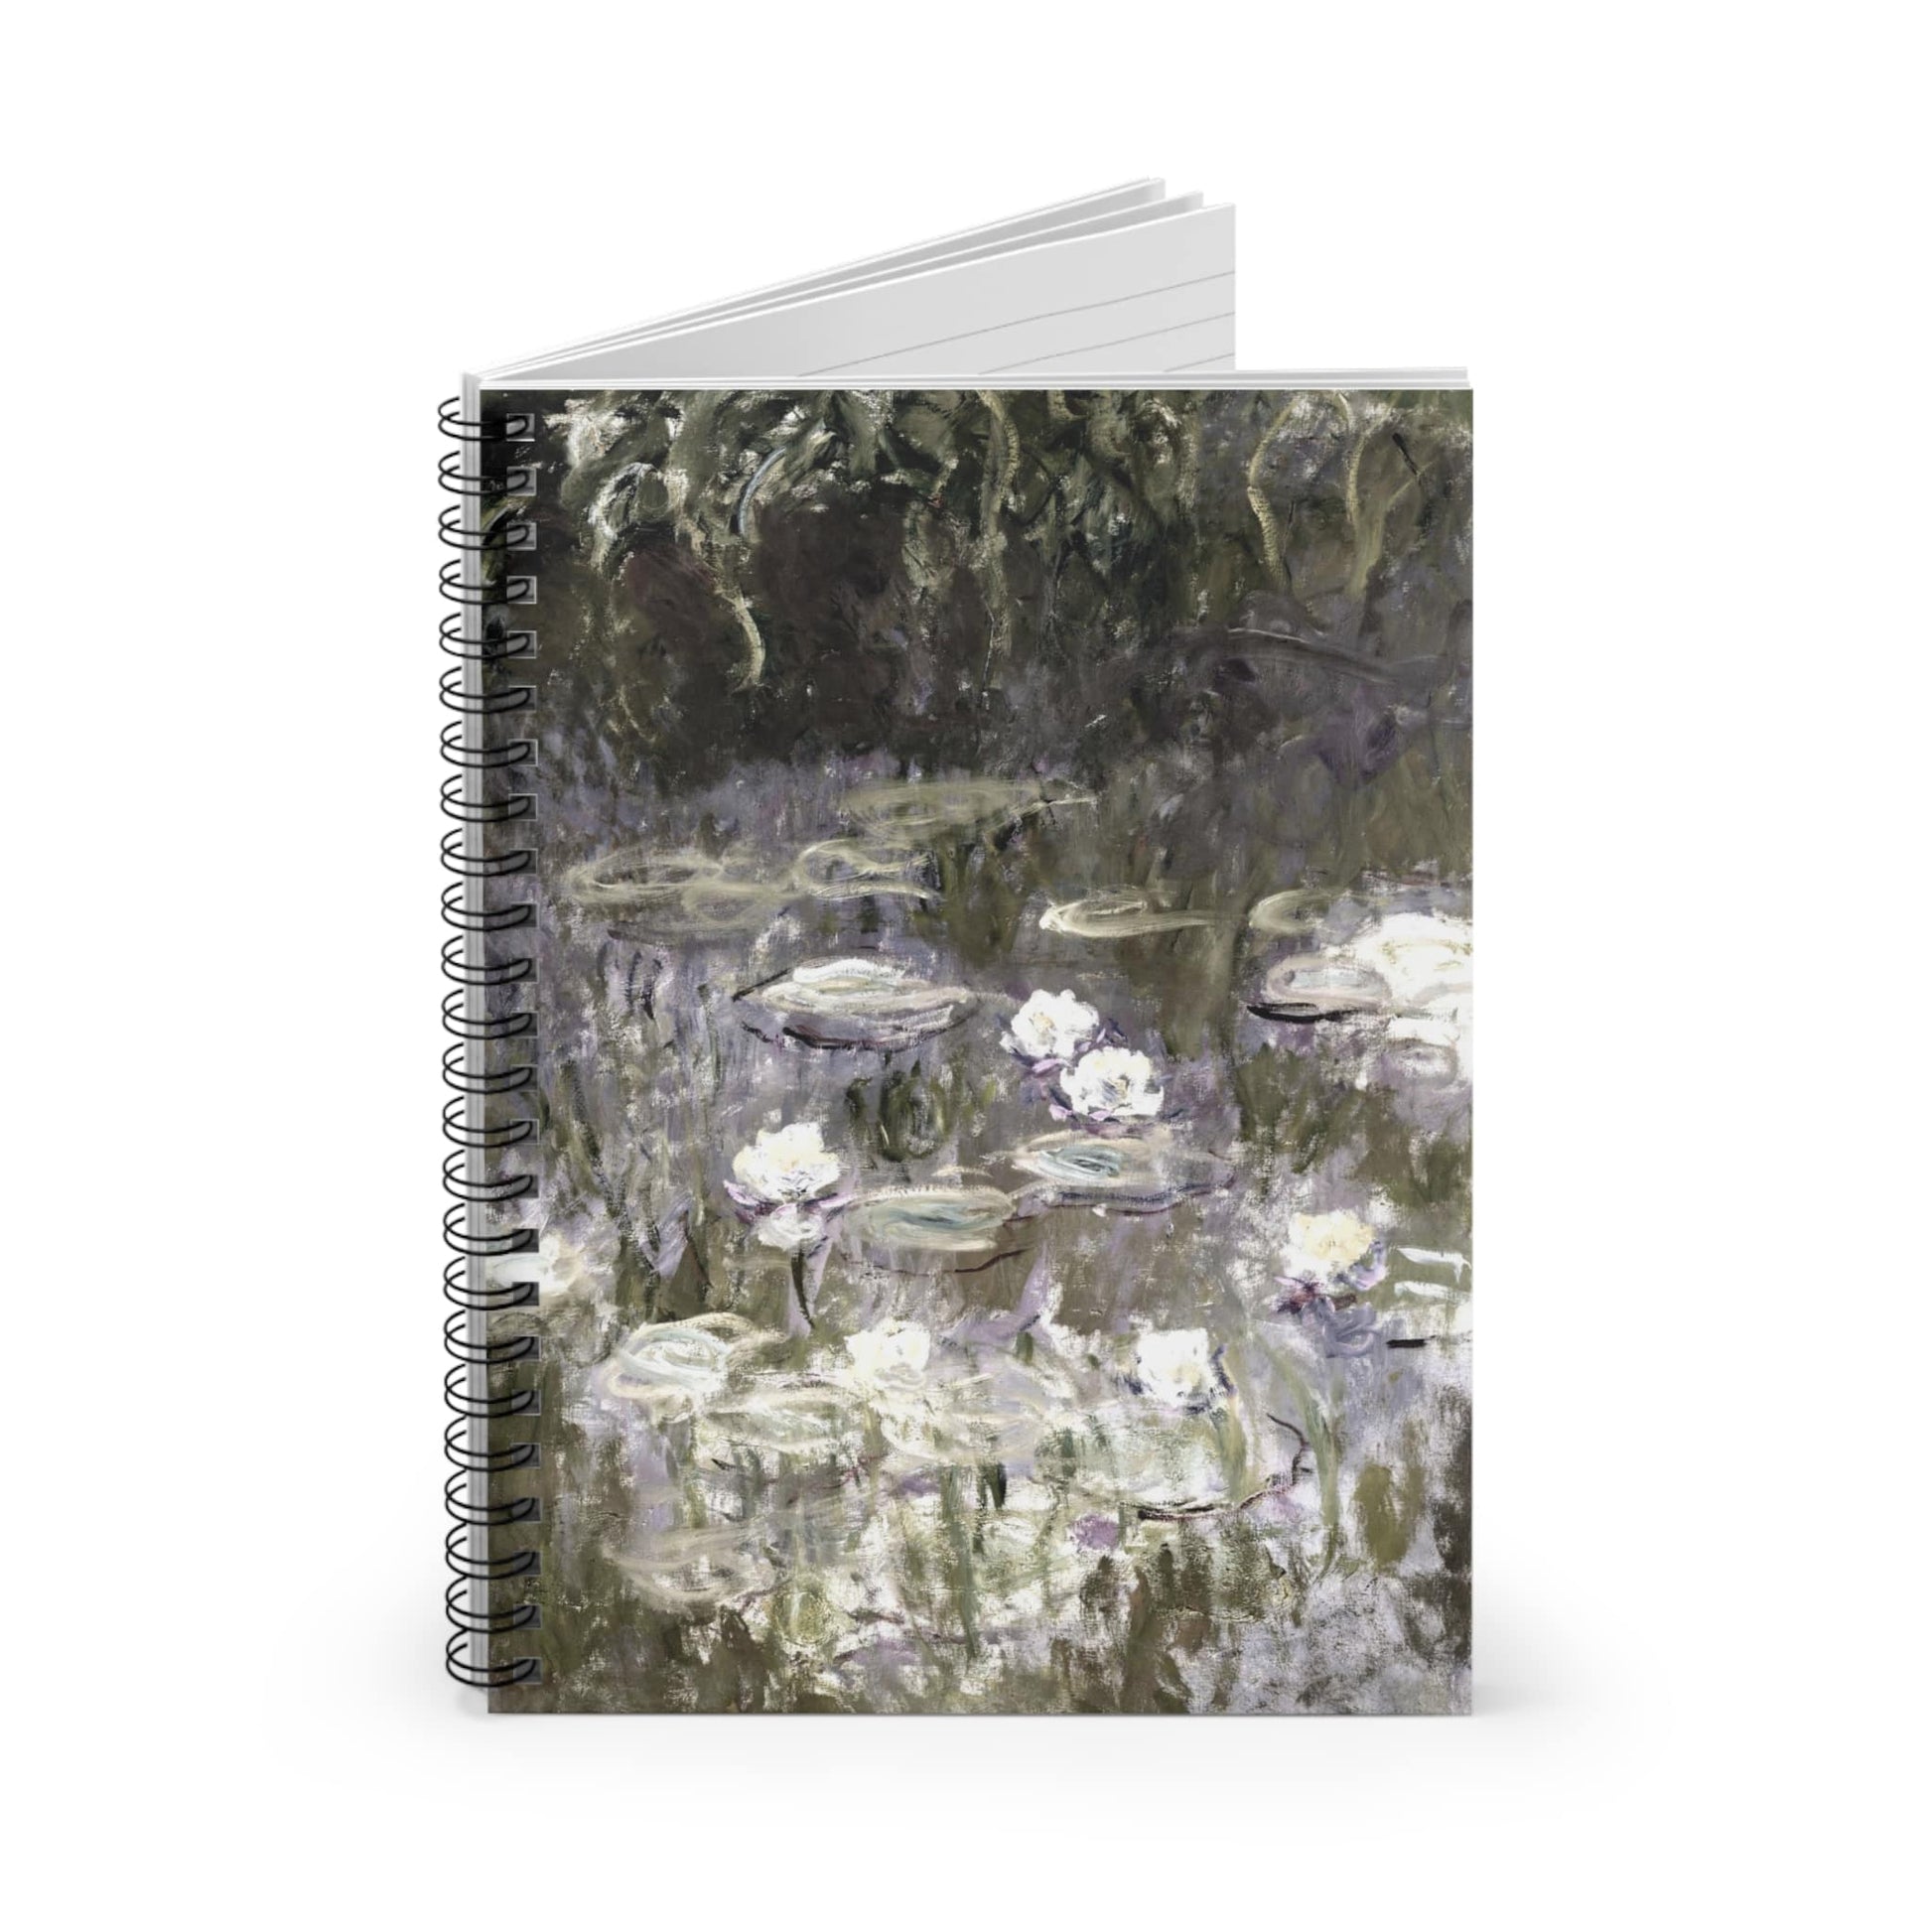 White Lilies on a Pond Spiral Notebook Standing up on White Desk